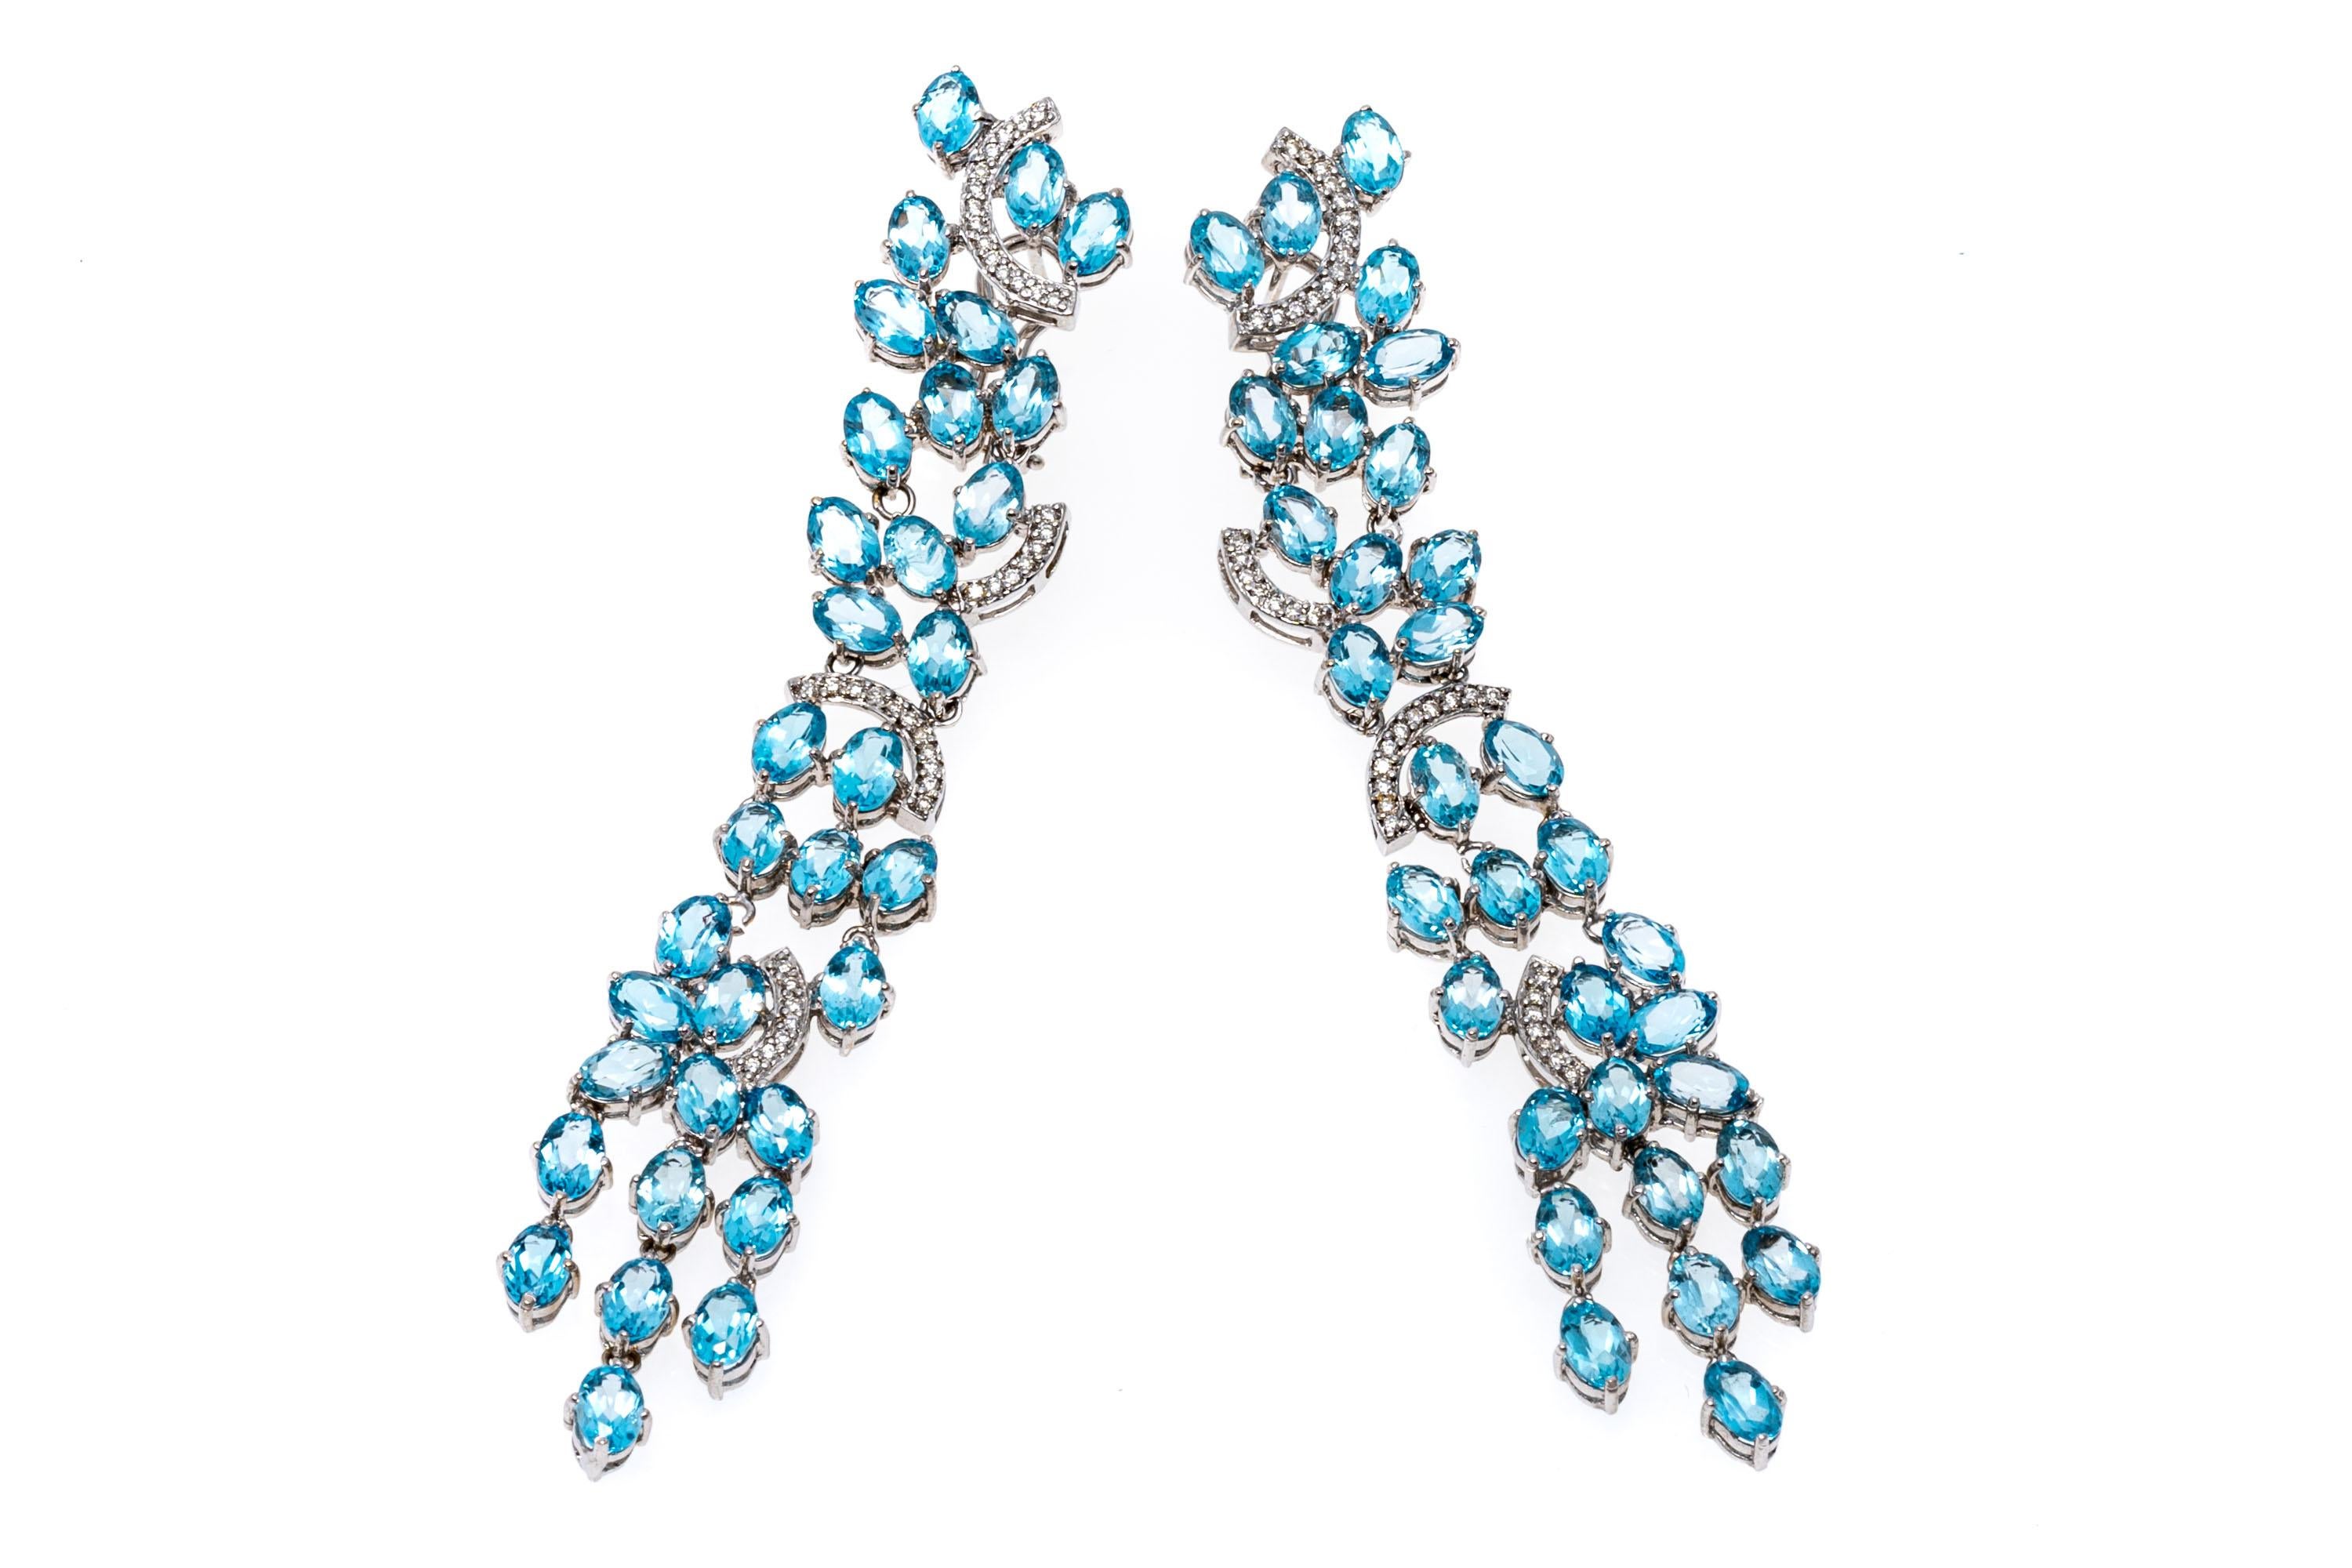 18k white gold earrings. These stunning waterfall earrings are set with long, twinkling rows of oval faceted, medium to light blue color blue topaz stones, approximately 27.06 TCW, and prong set. Scattered among the draped blue topaz are curves of